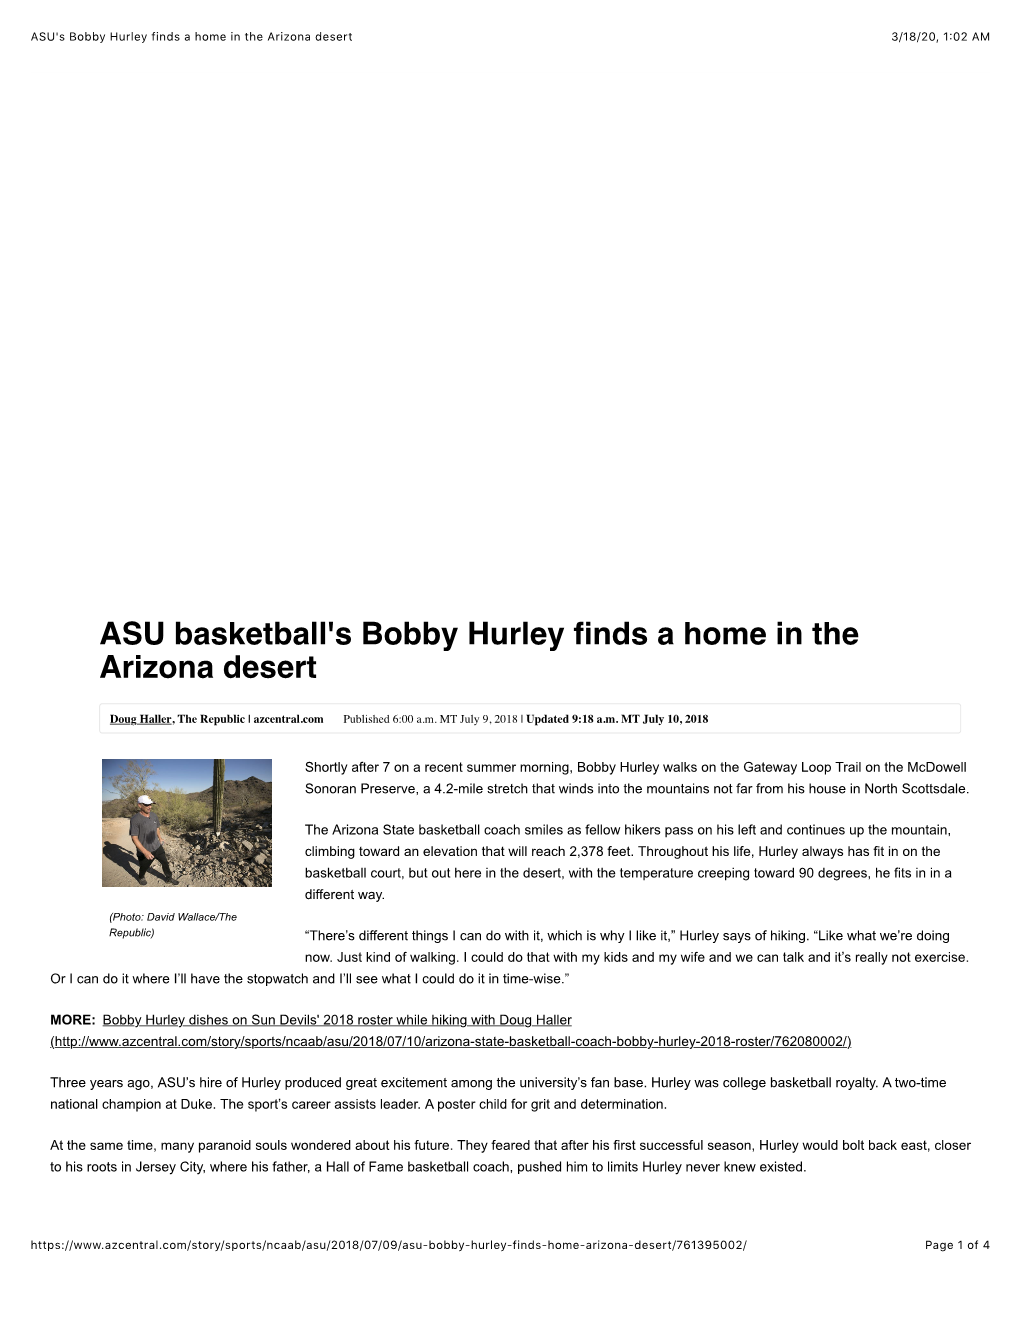 ASU's Bobby Hurley Finds a Home in the Arizona Desert 3/18/20, 1�02 AM